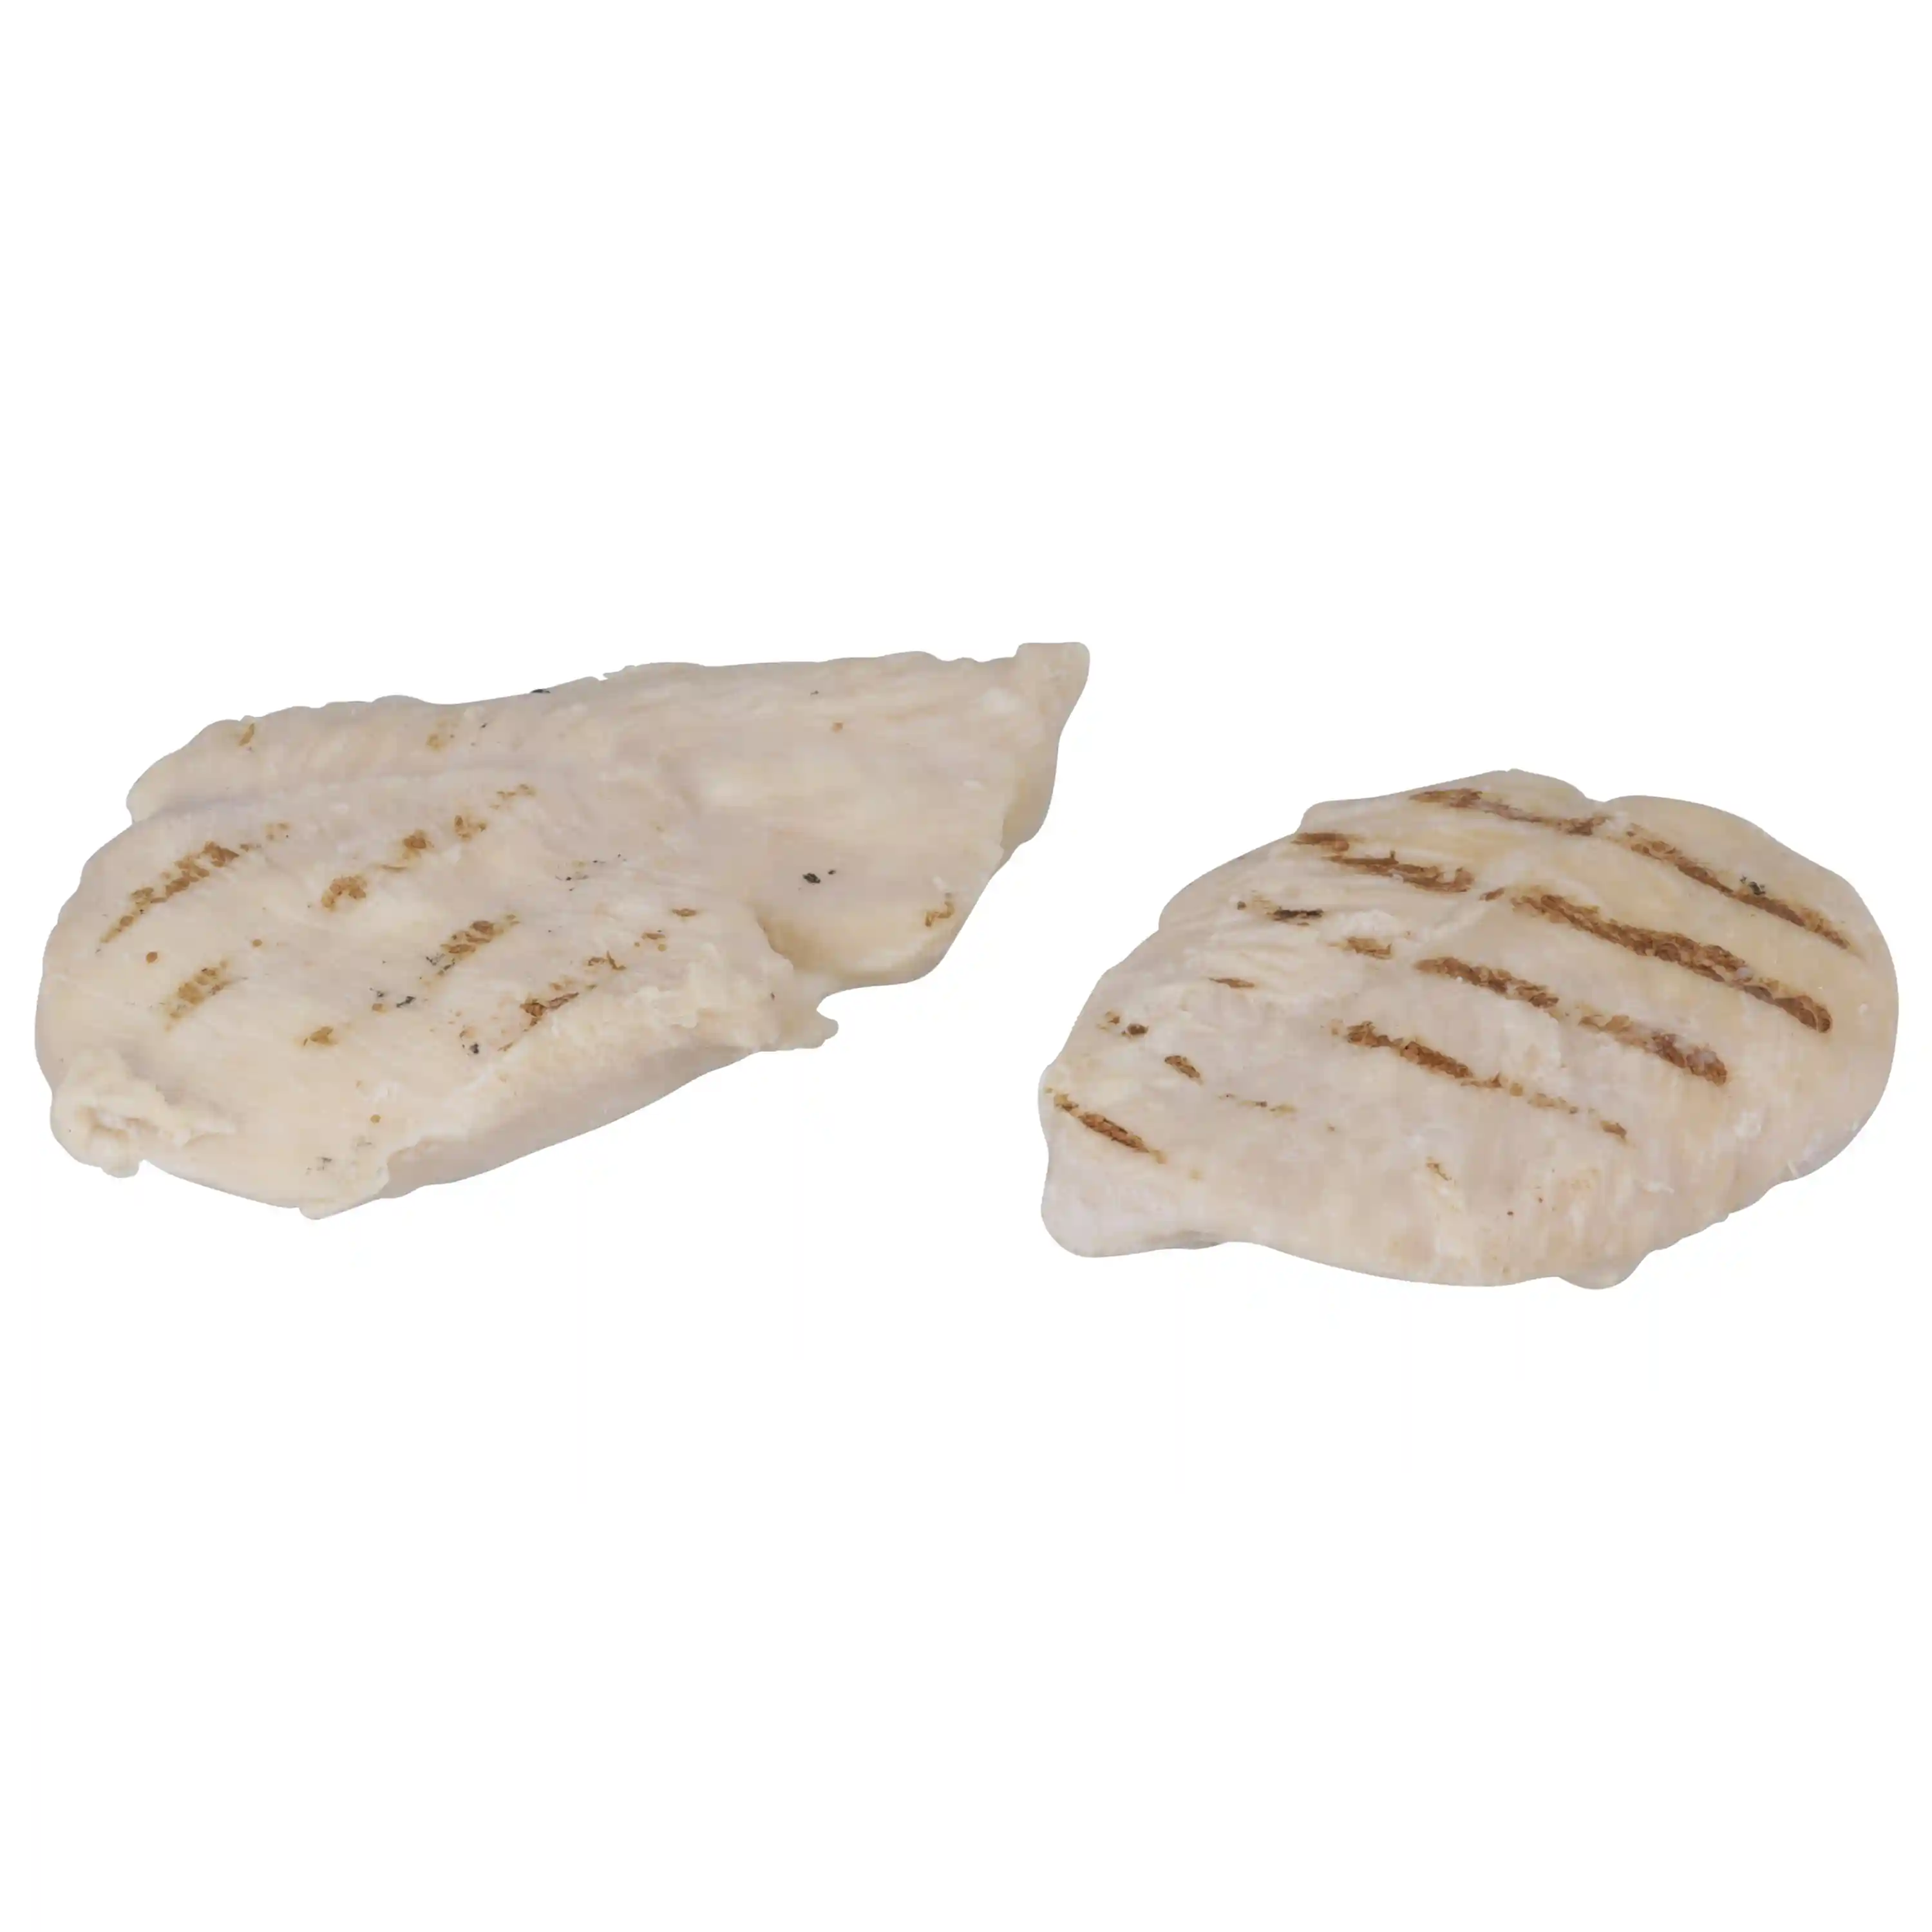 Tyson® Flavor-Redi® Fully Cooked Unbreaded Grilled Chicken Breast Filets, 4.5 oz._image_11